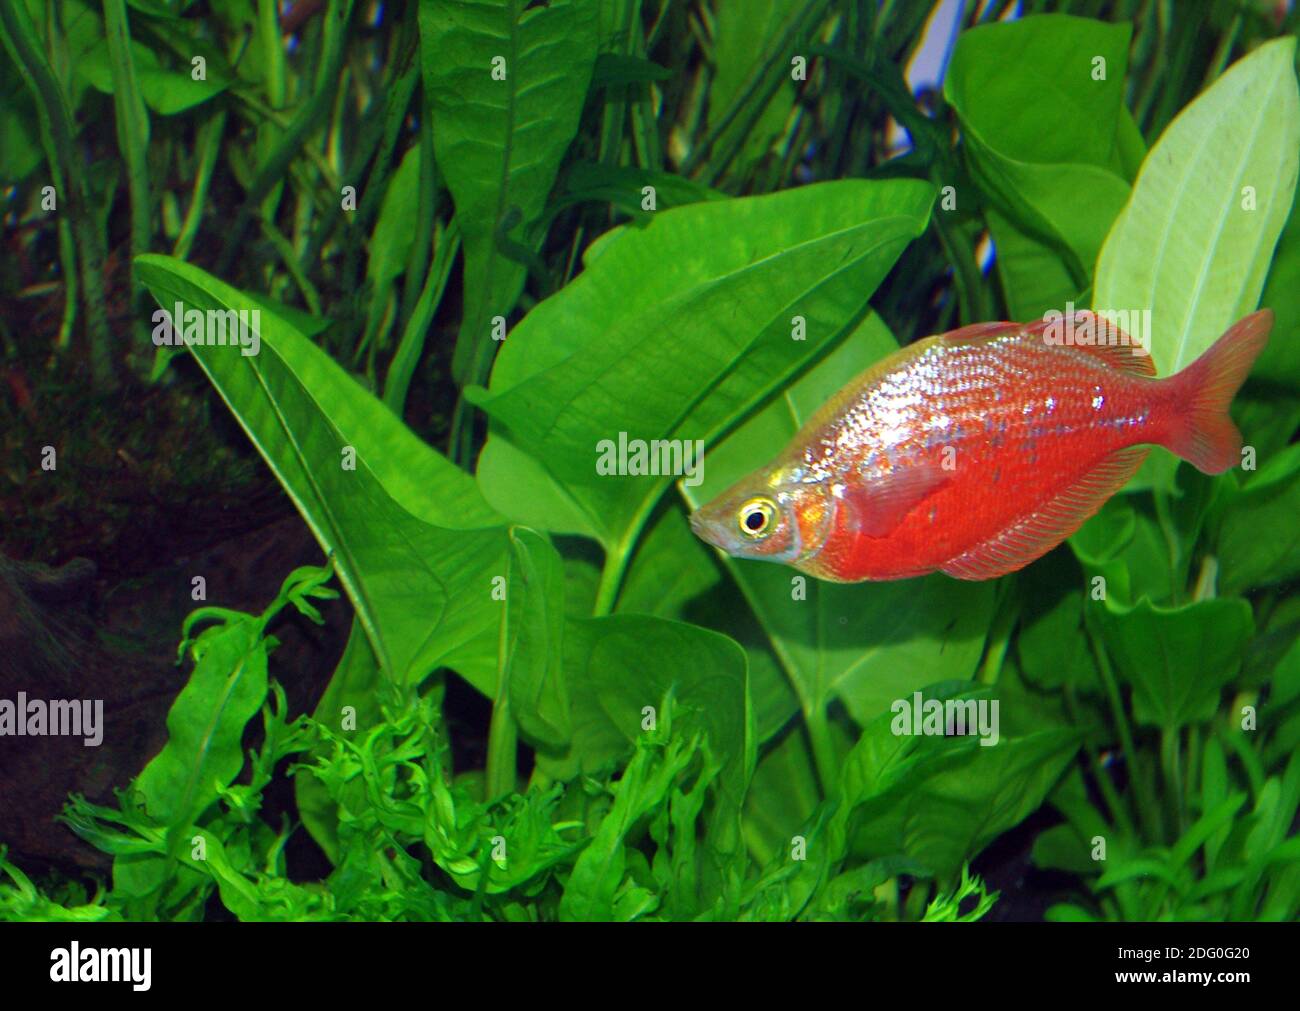 Male Red rainbow fish, Glossolepis incisus Stock Photo